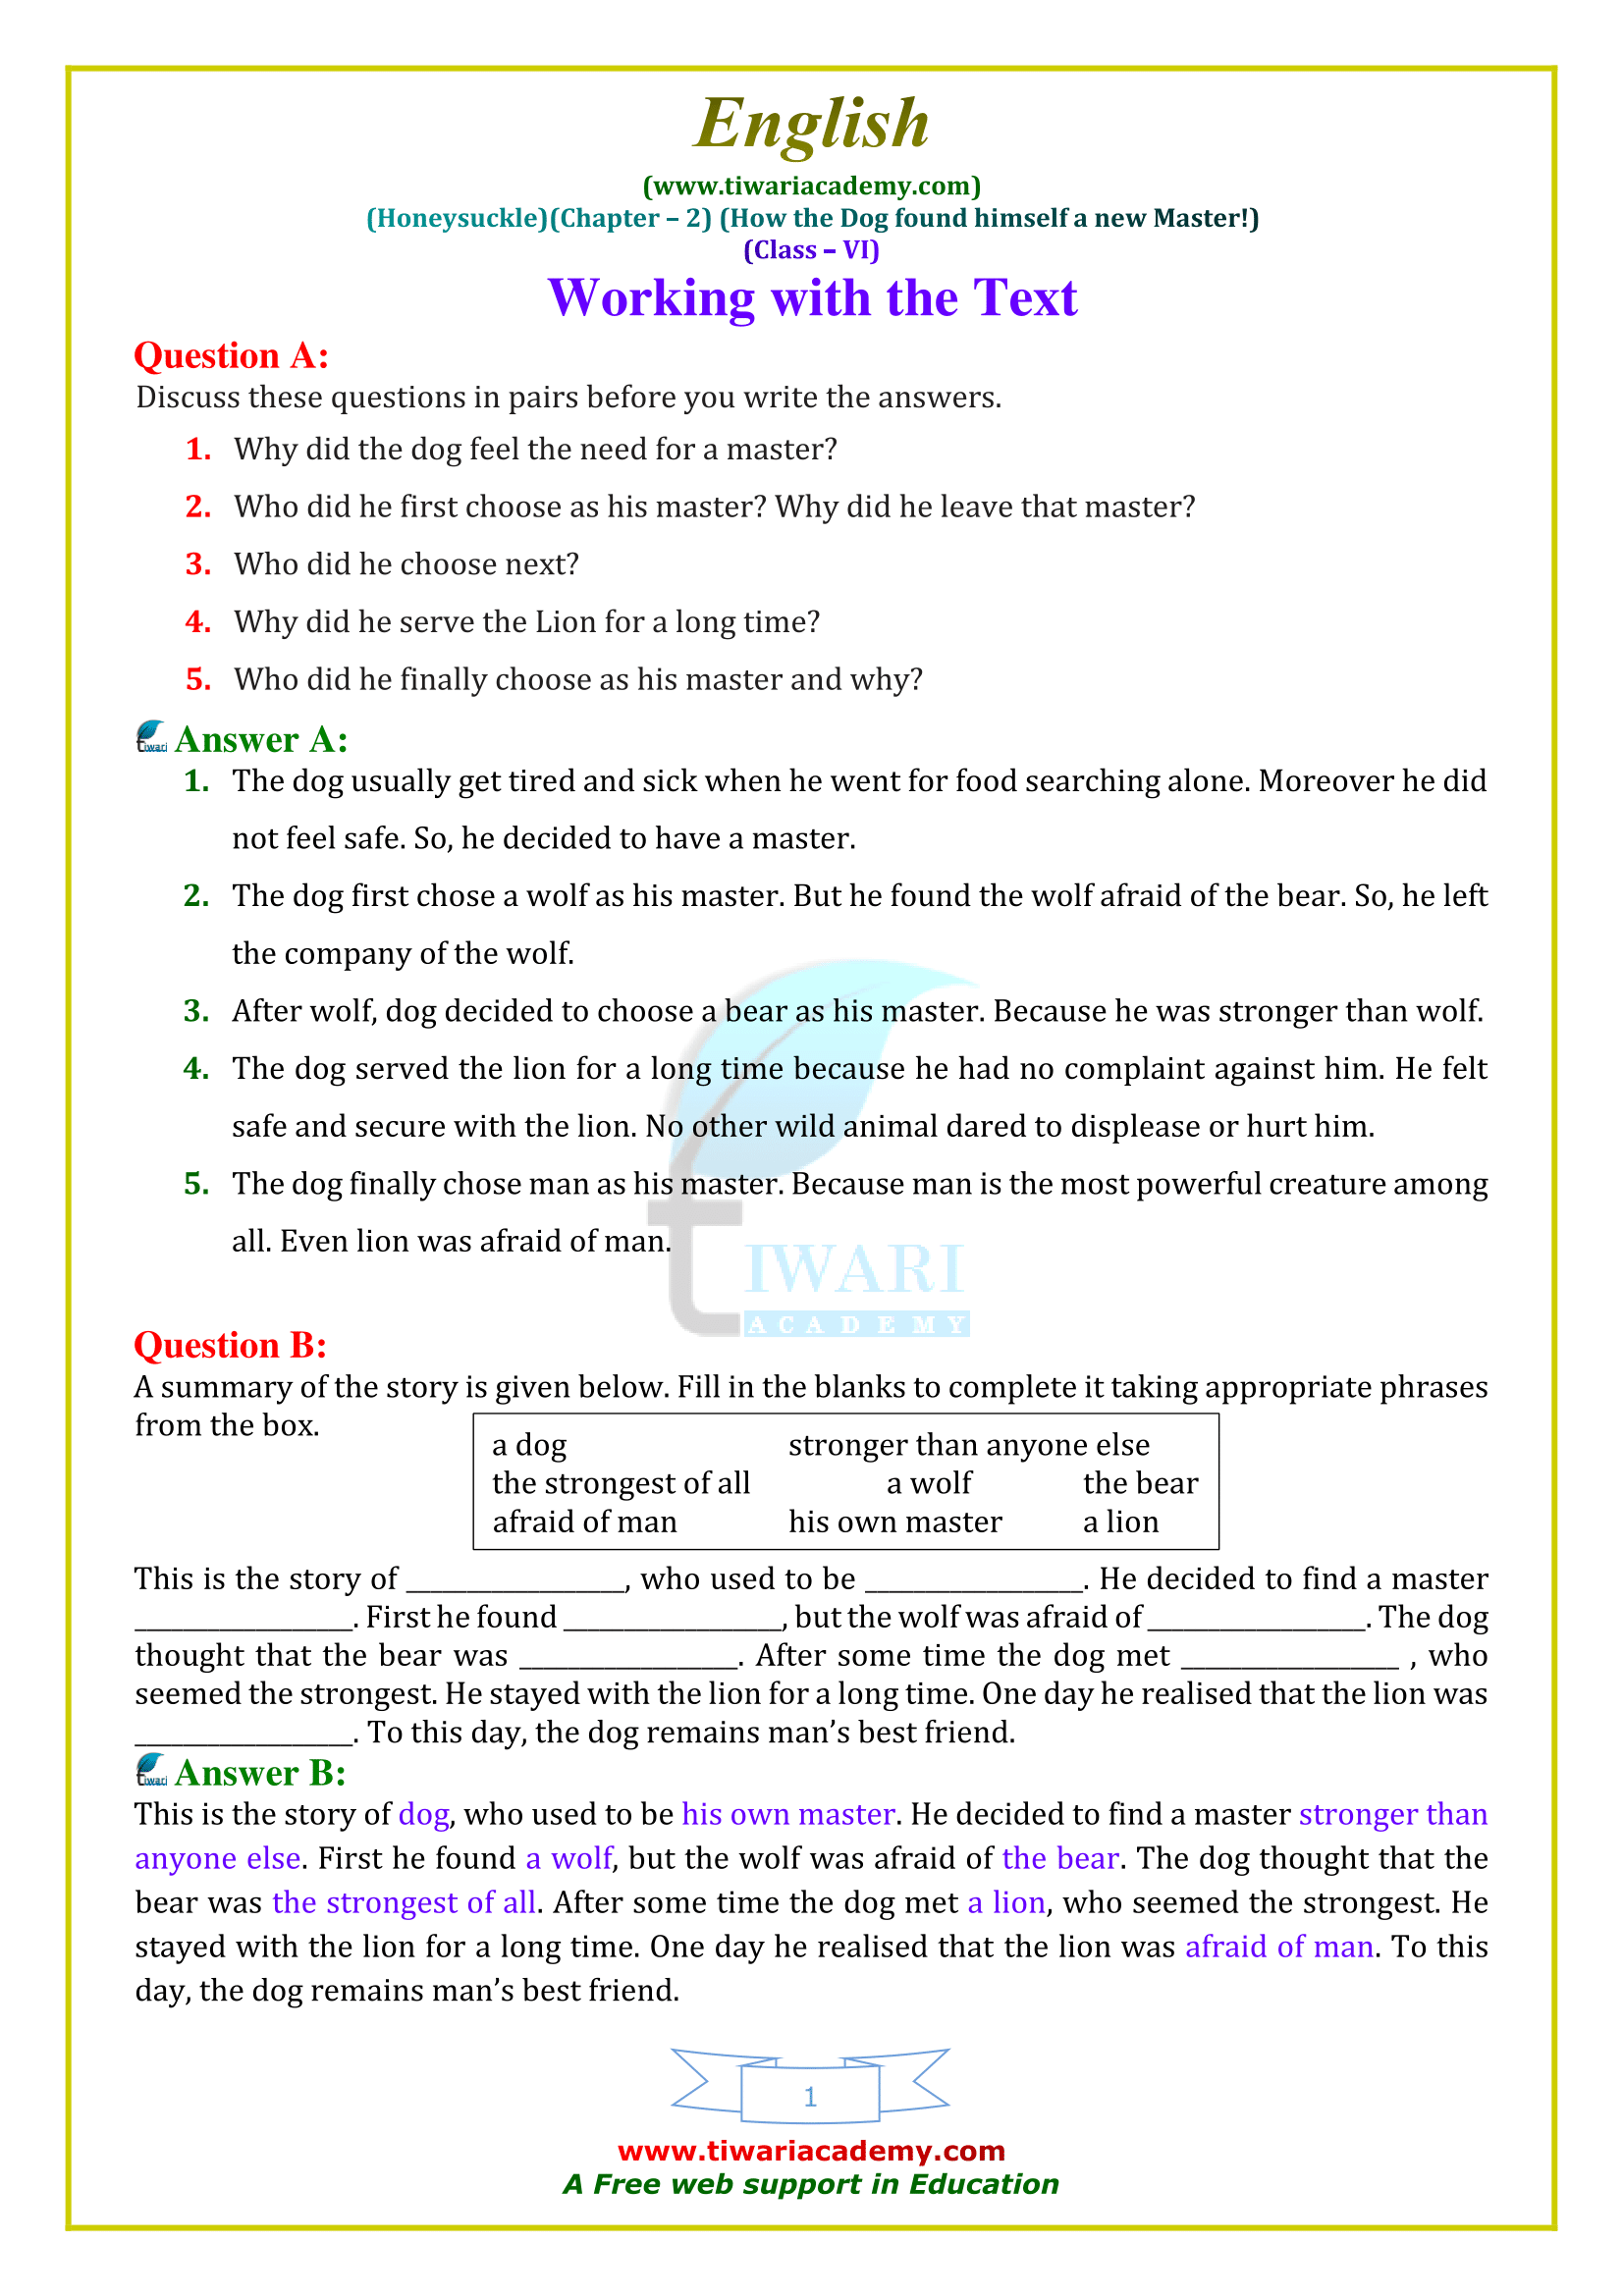 NCERT Solutions for Class 6 English Honeysuckle Chapter 2 How the Dog Found Himself a New Master!